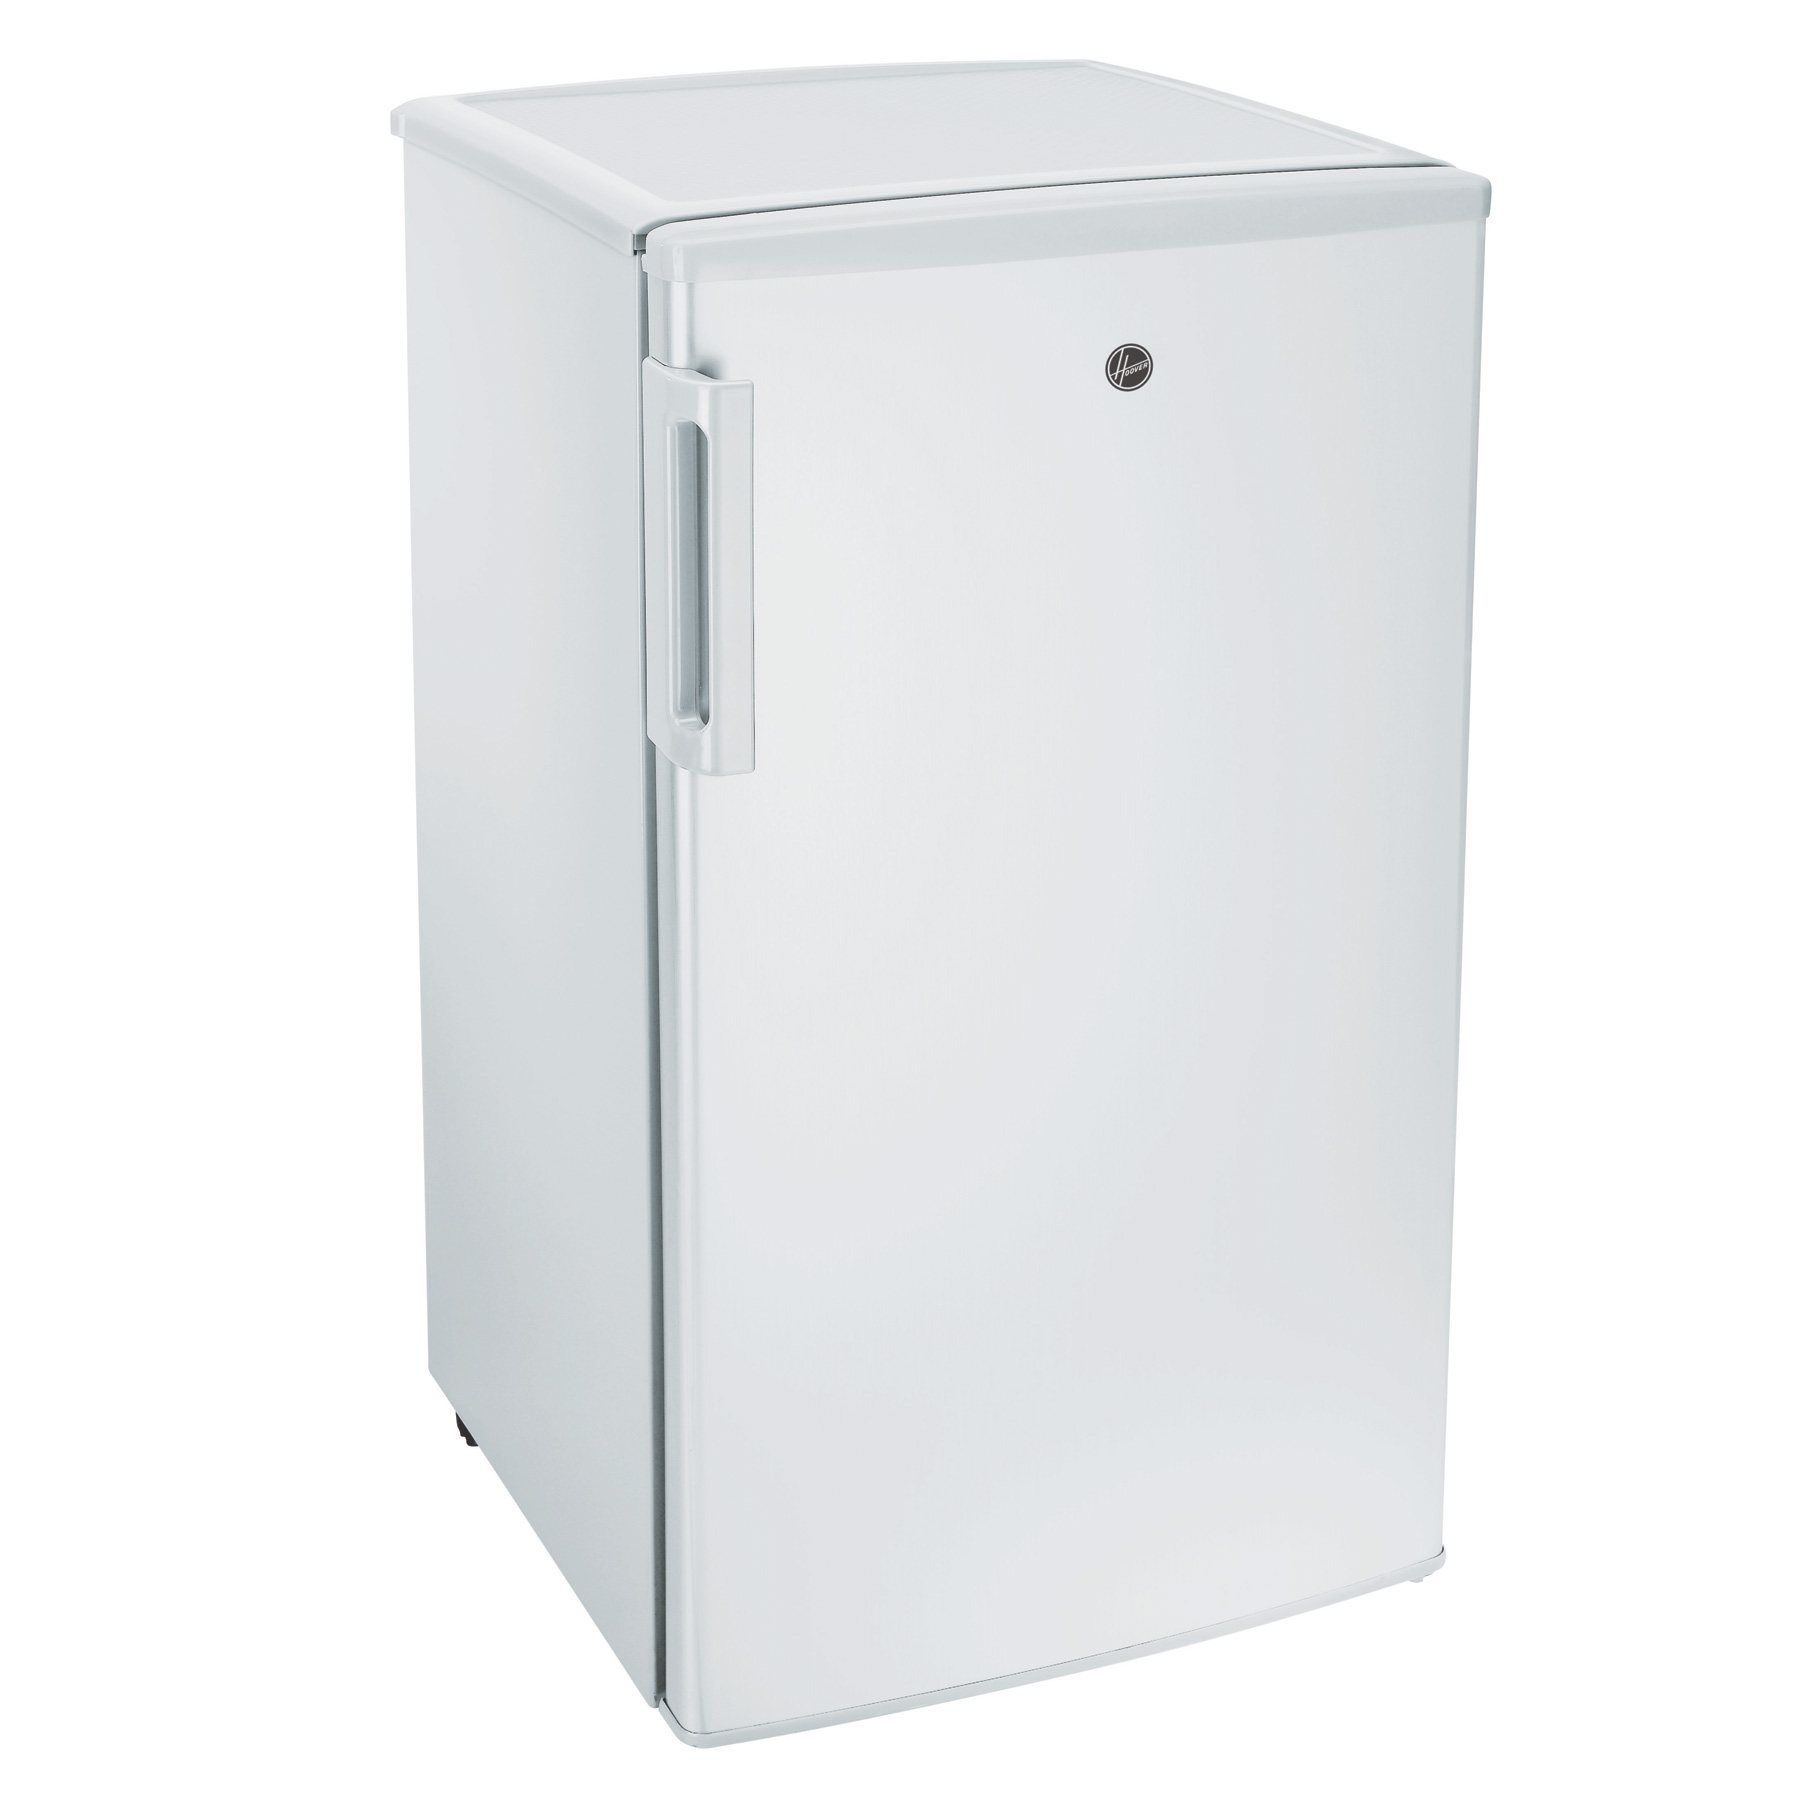 Image of Hoover HTUP130WKN 50cm Undercounter Freezer in White F Rated 64L